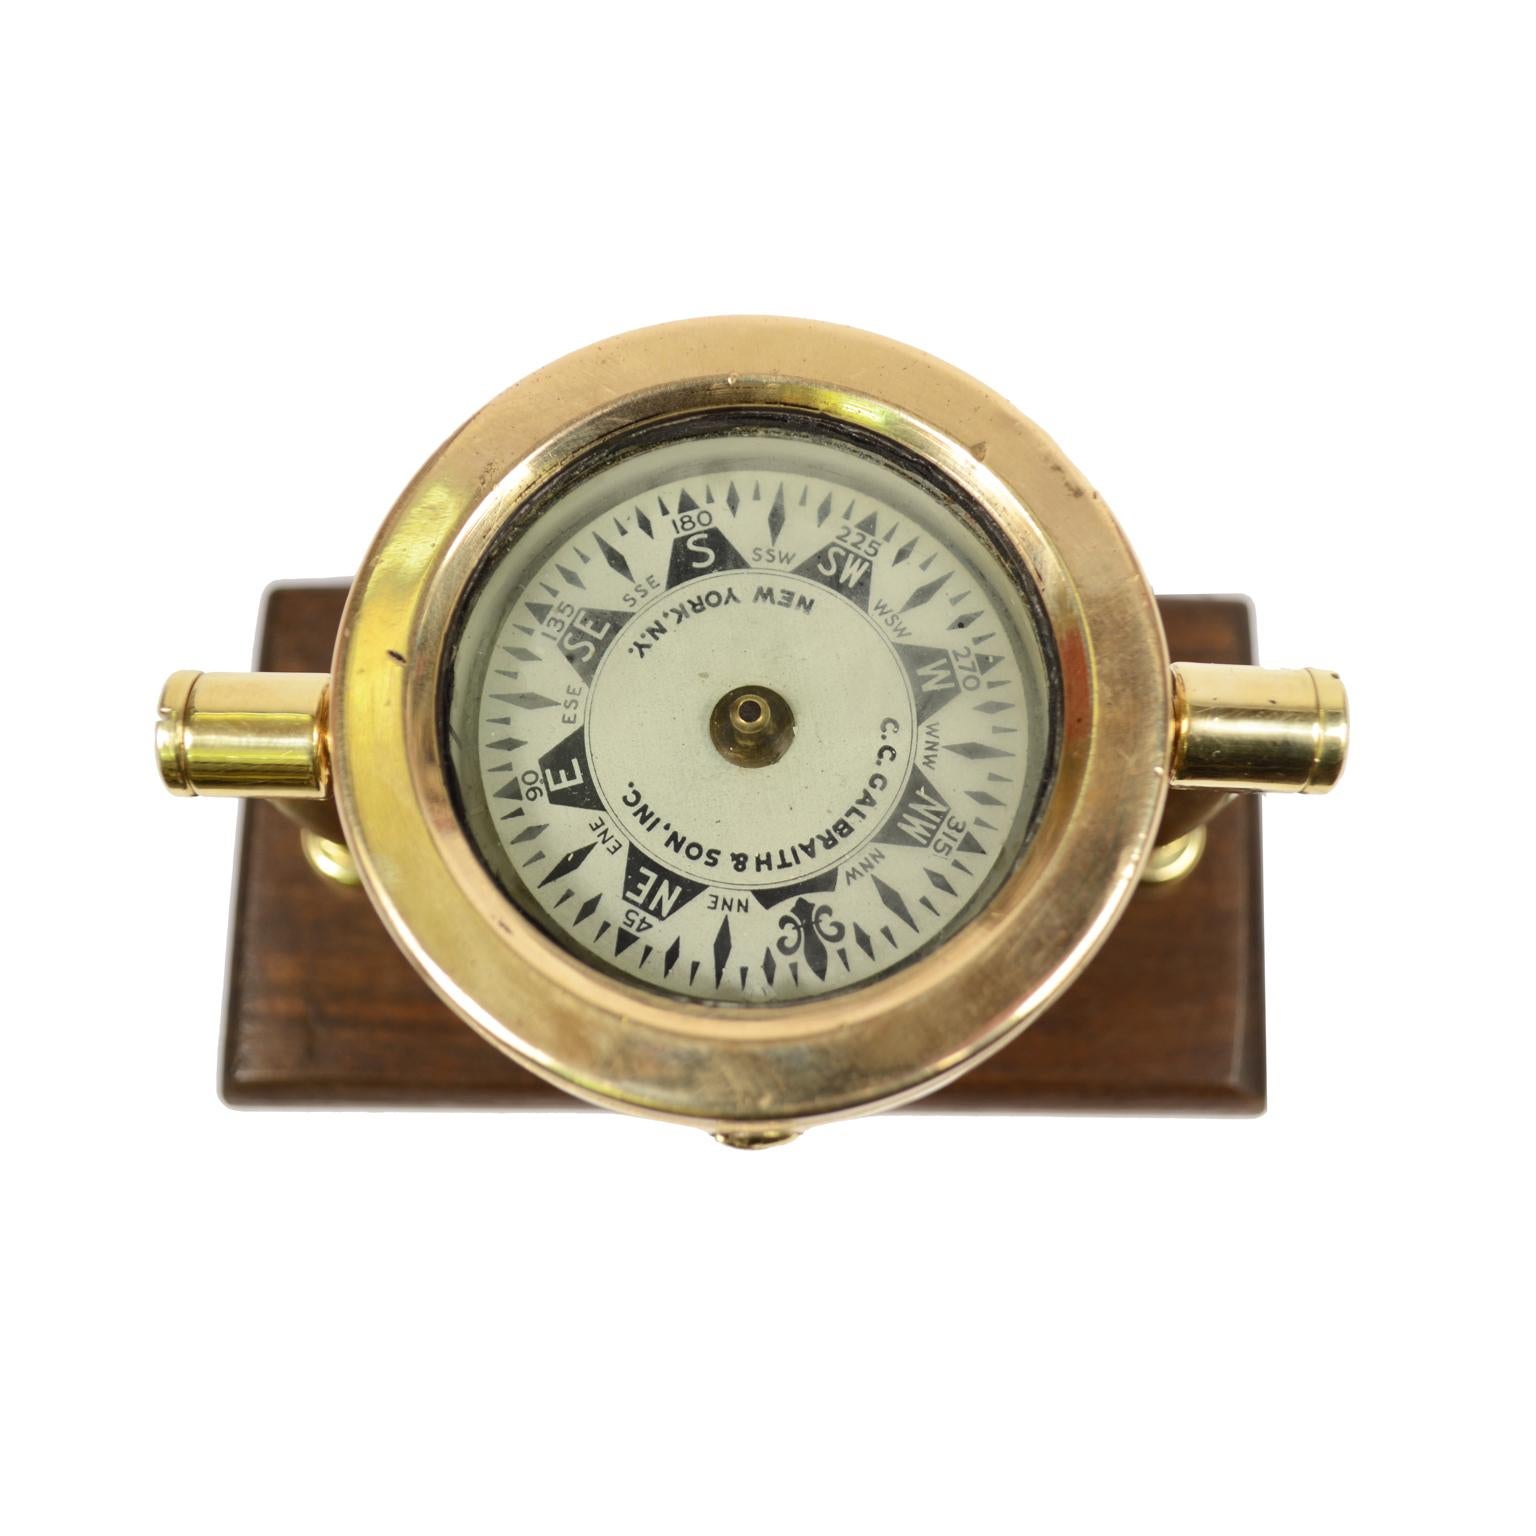 20th Century American Compass from the Early 1900s Made of Brass Mounted on a Walnut Board